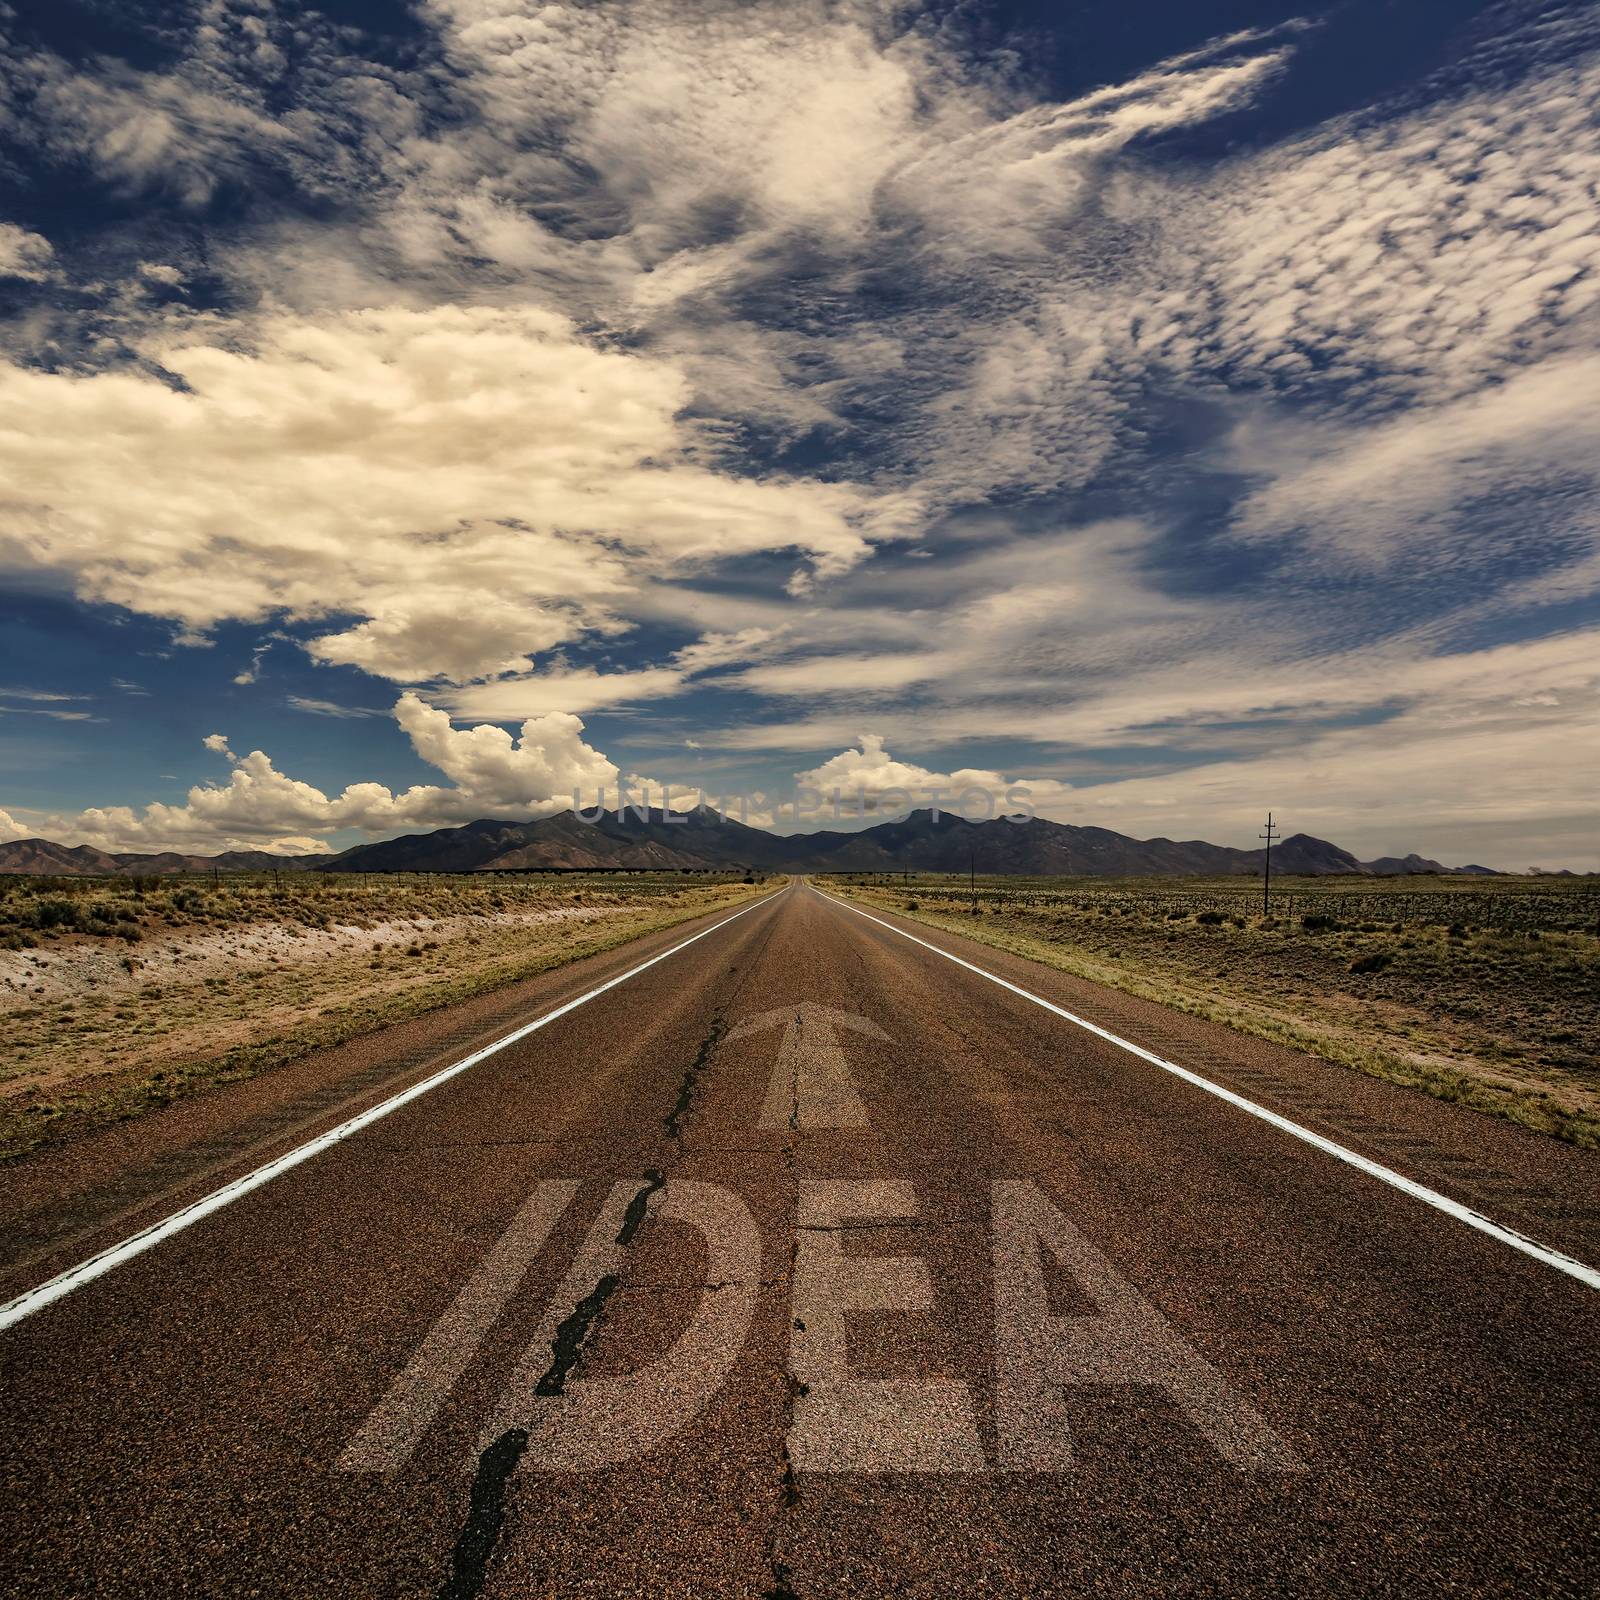 Conceptual image of desert road with the word idea and arrow